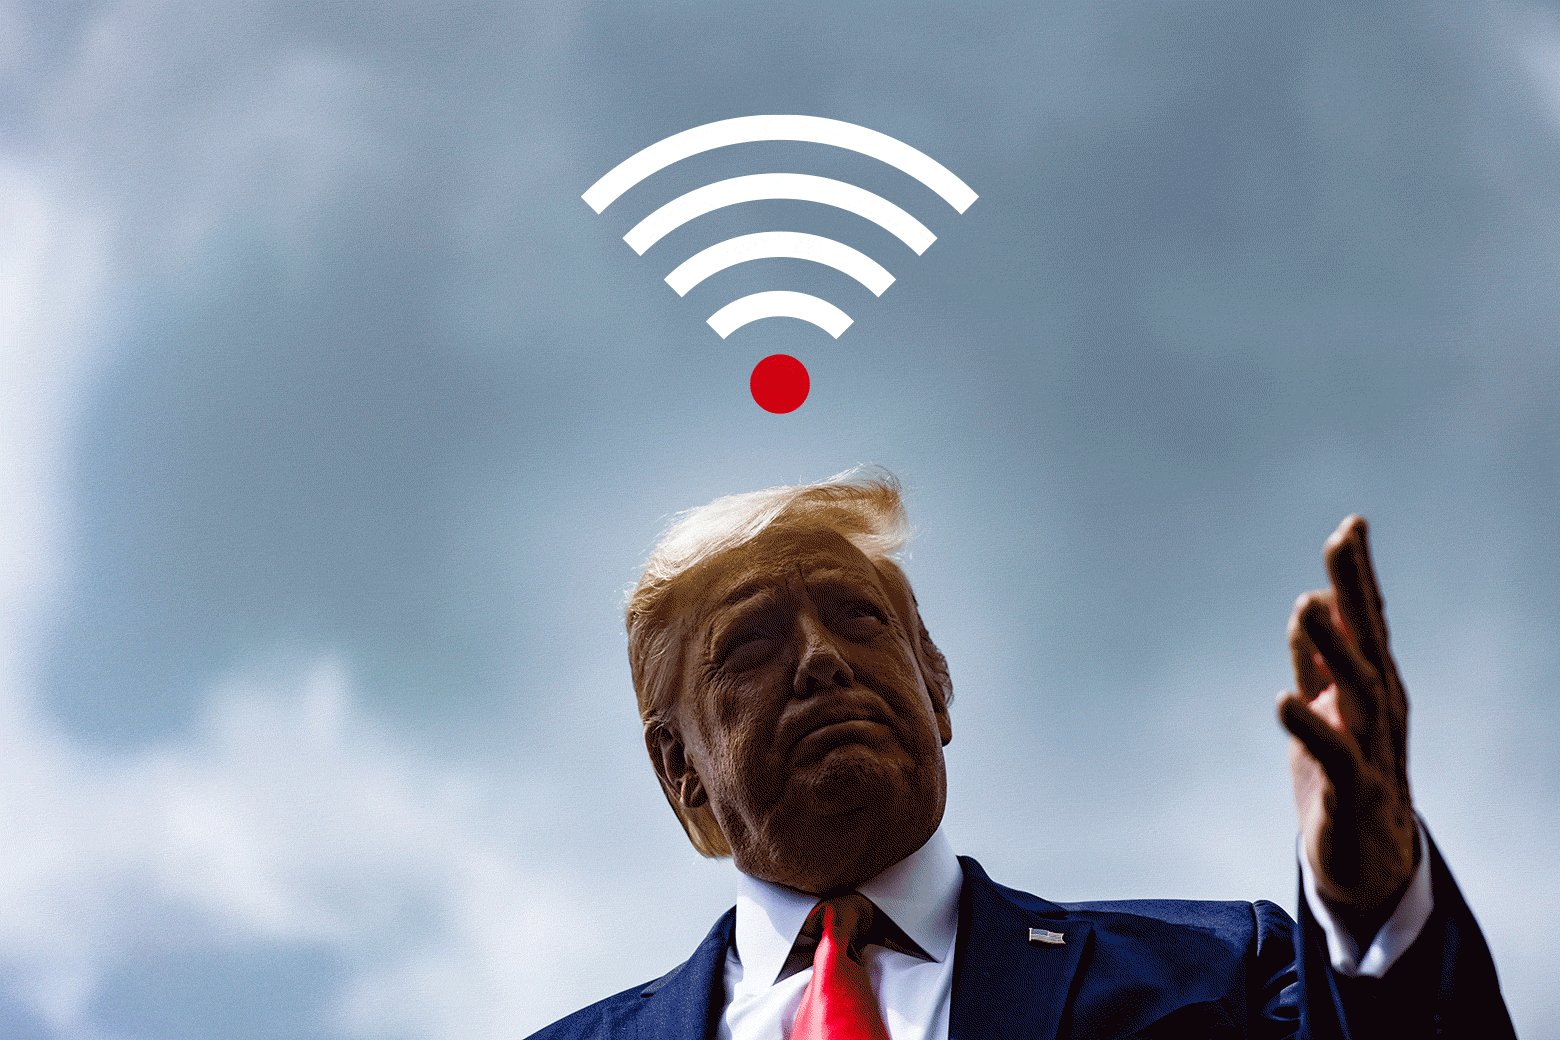 Low Wi-Fi signal blinking above Donald Trump's head